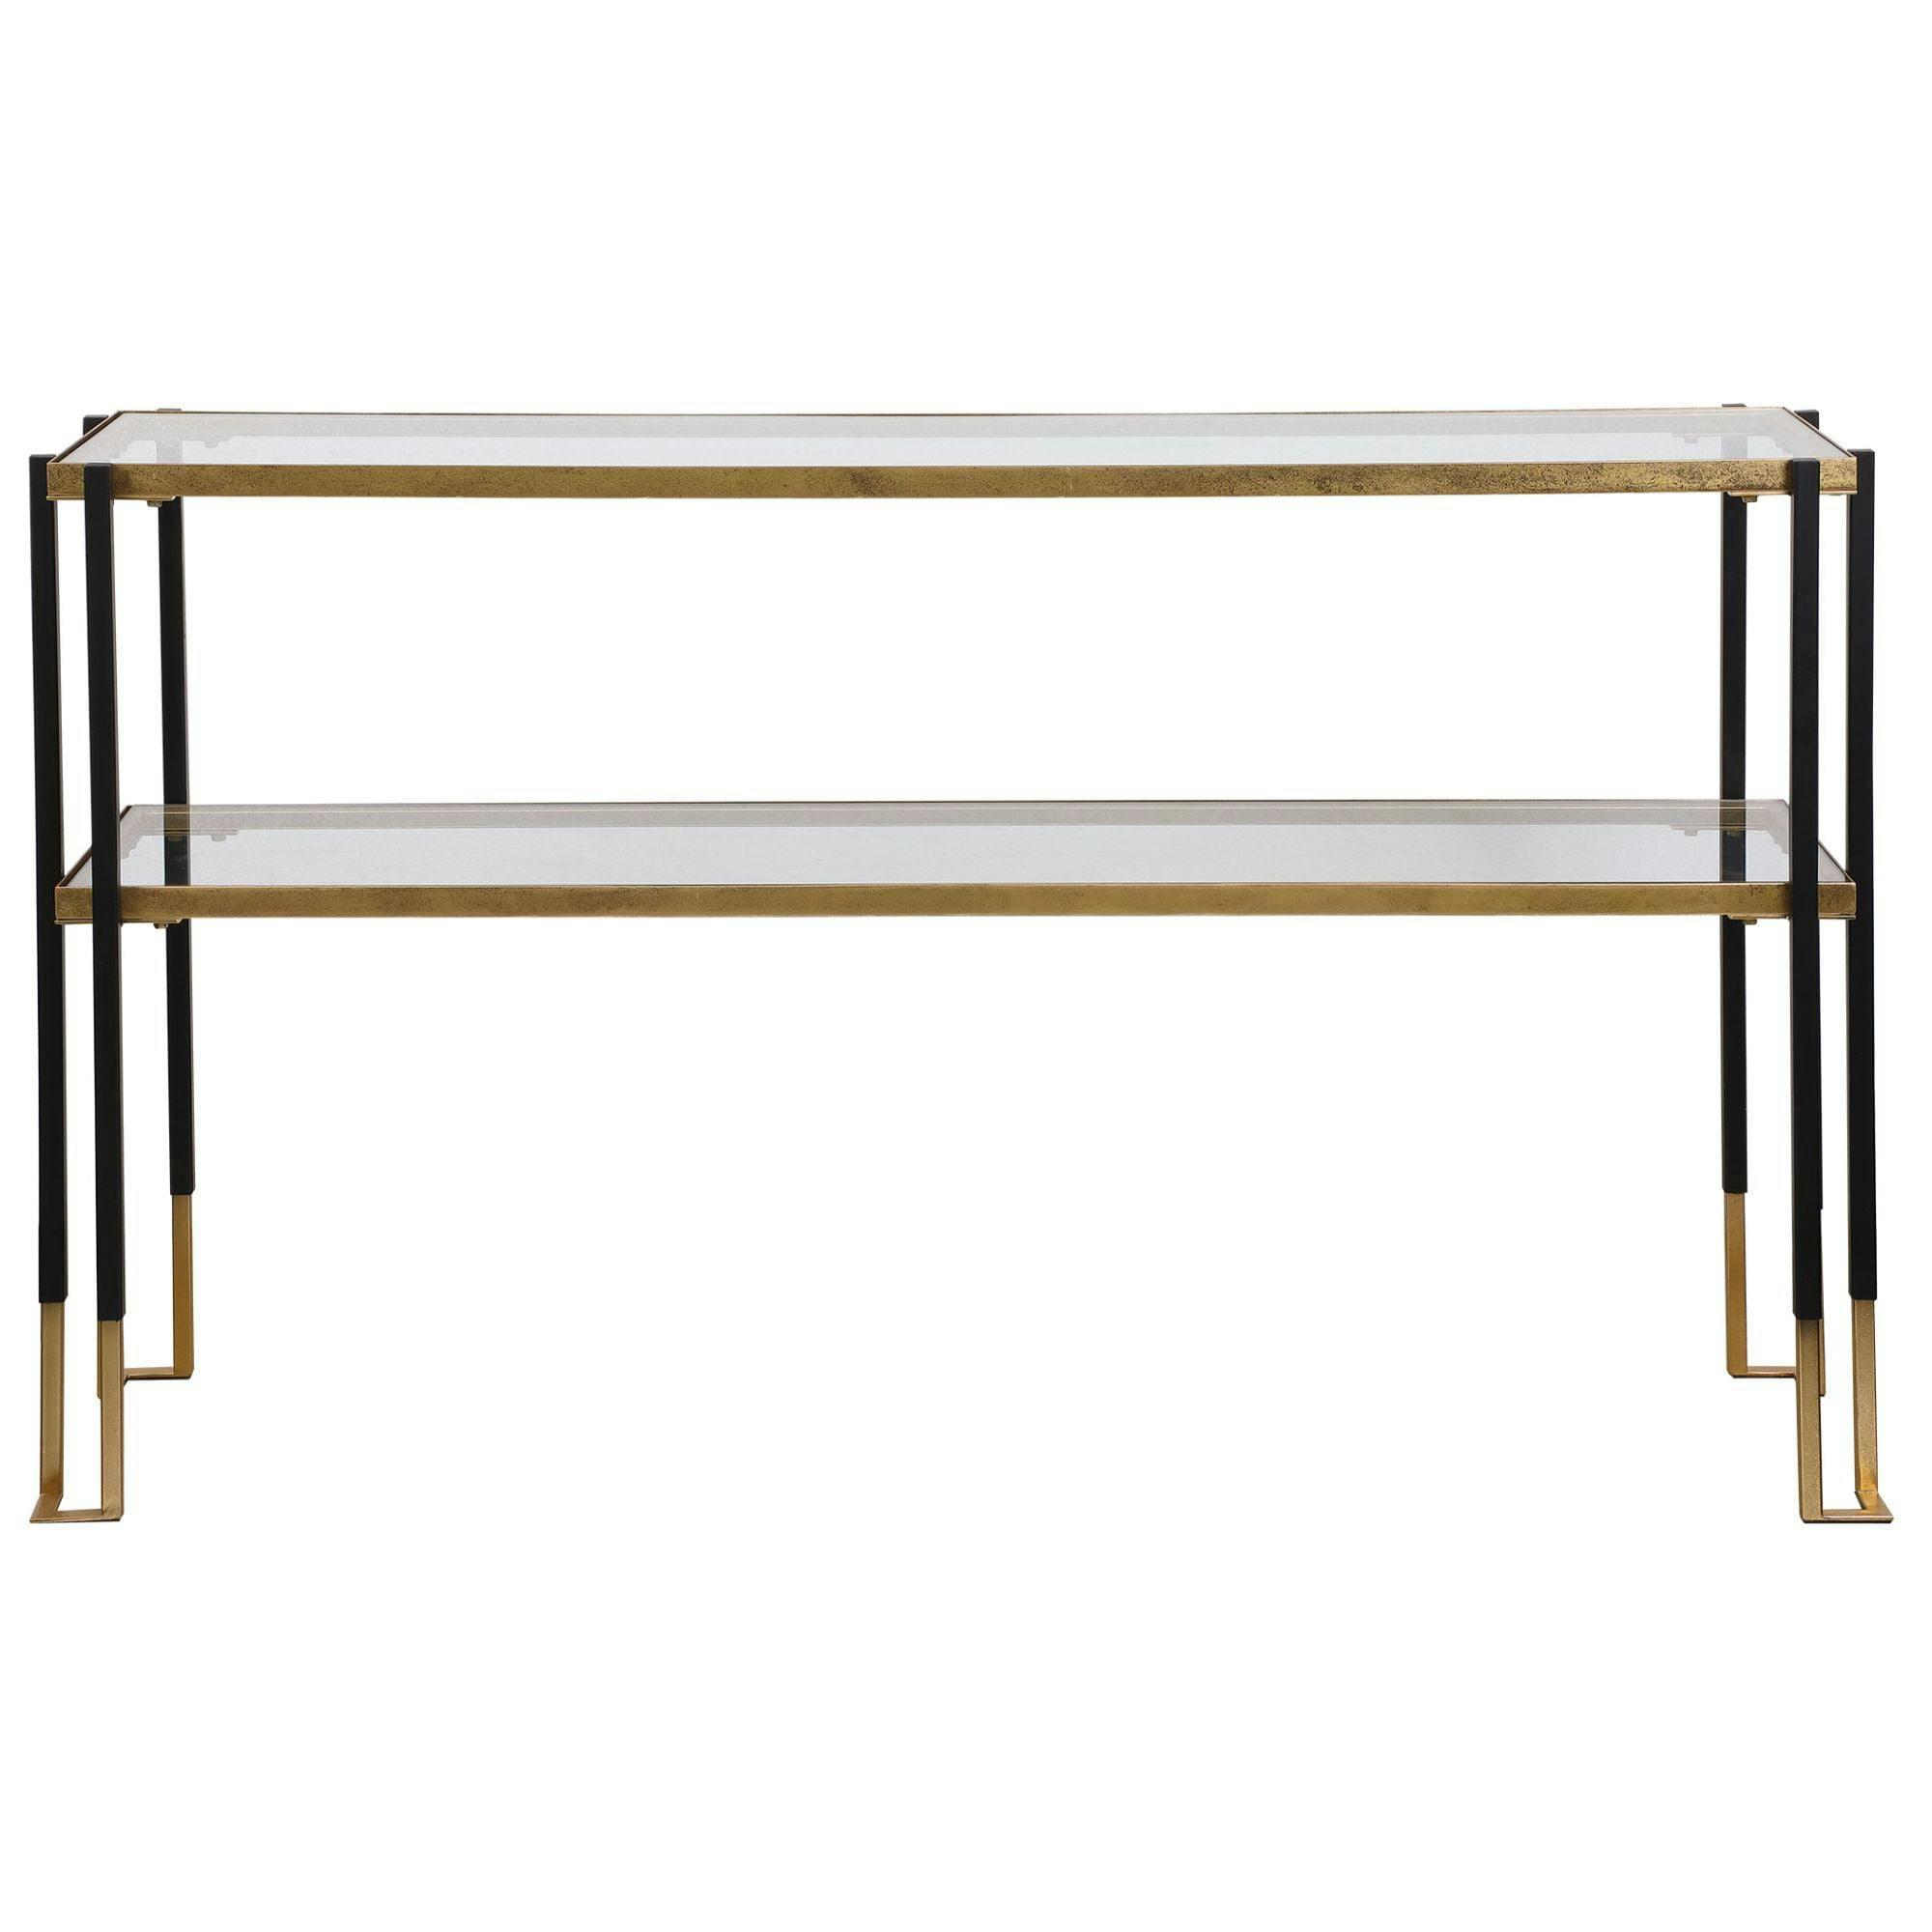 Contemporary Black and Gold Rectangular Console Table with Tempered Glass Shelf